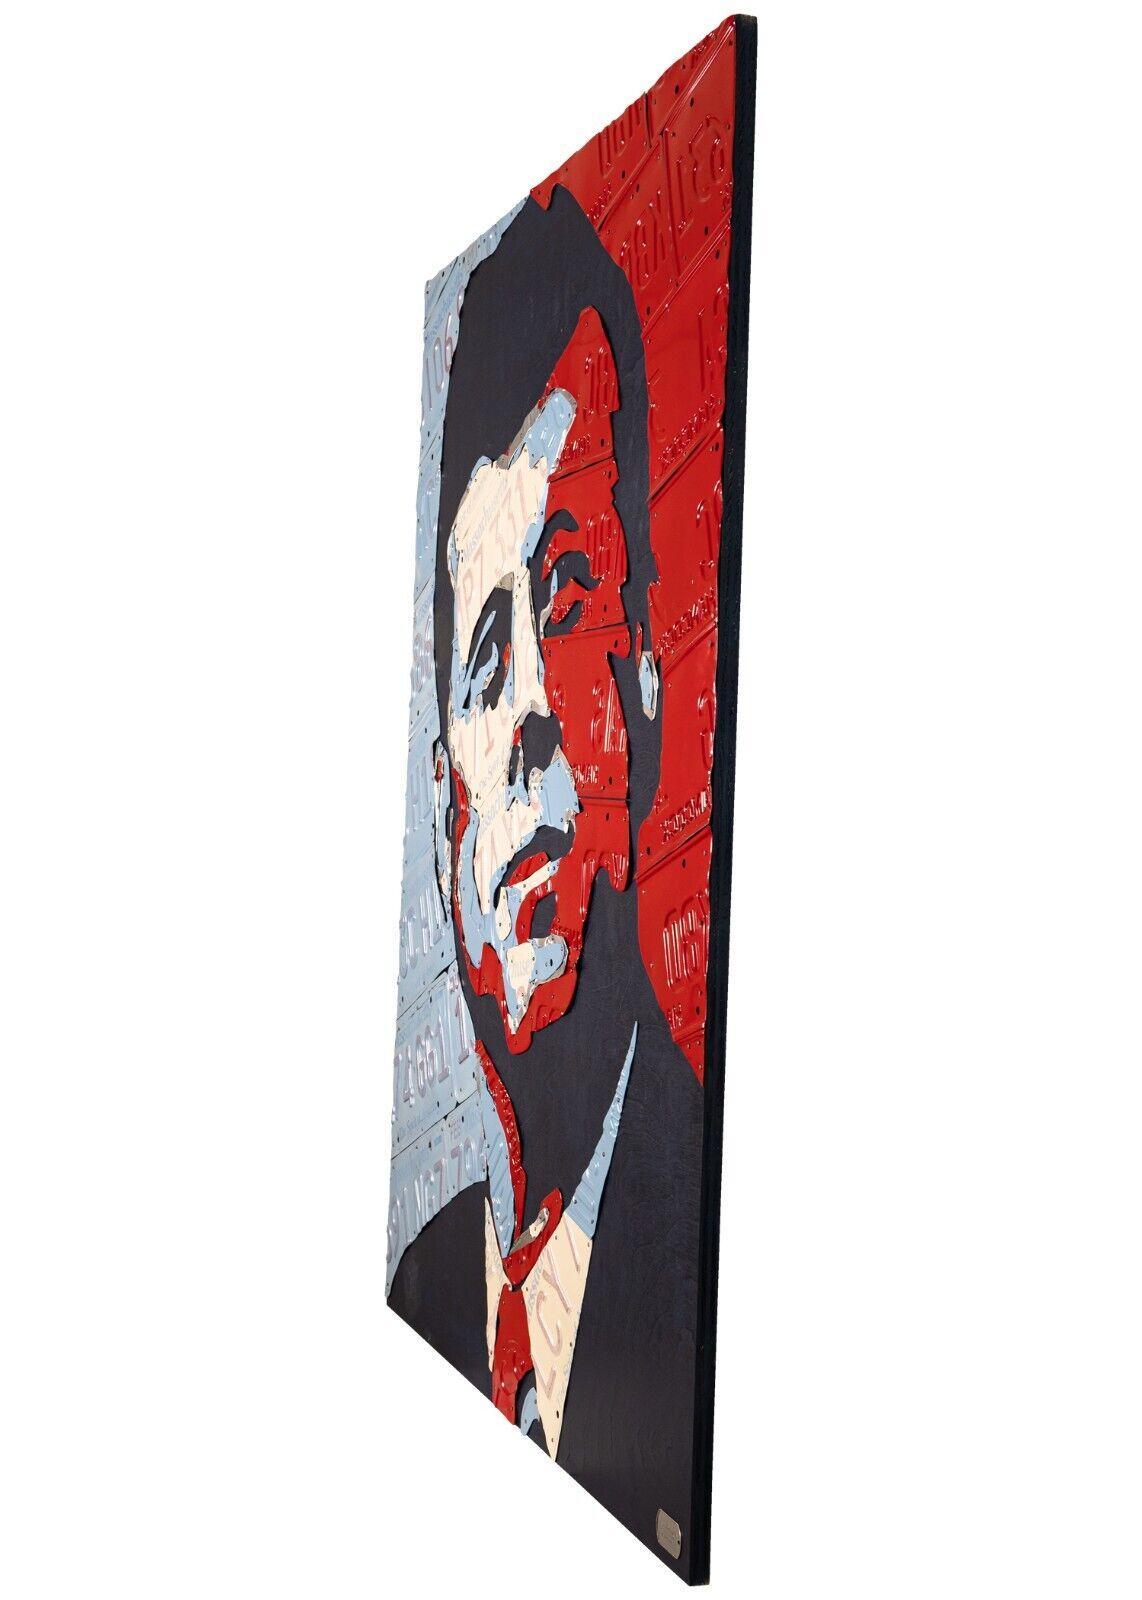 Recycled vintage red, light blue, and silver license plates from JFK's home state of Massachusetts are repurposed to create this amazing one-of-a-kind portrait of this beloved and iconic President. The fifth in this popular series follows the